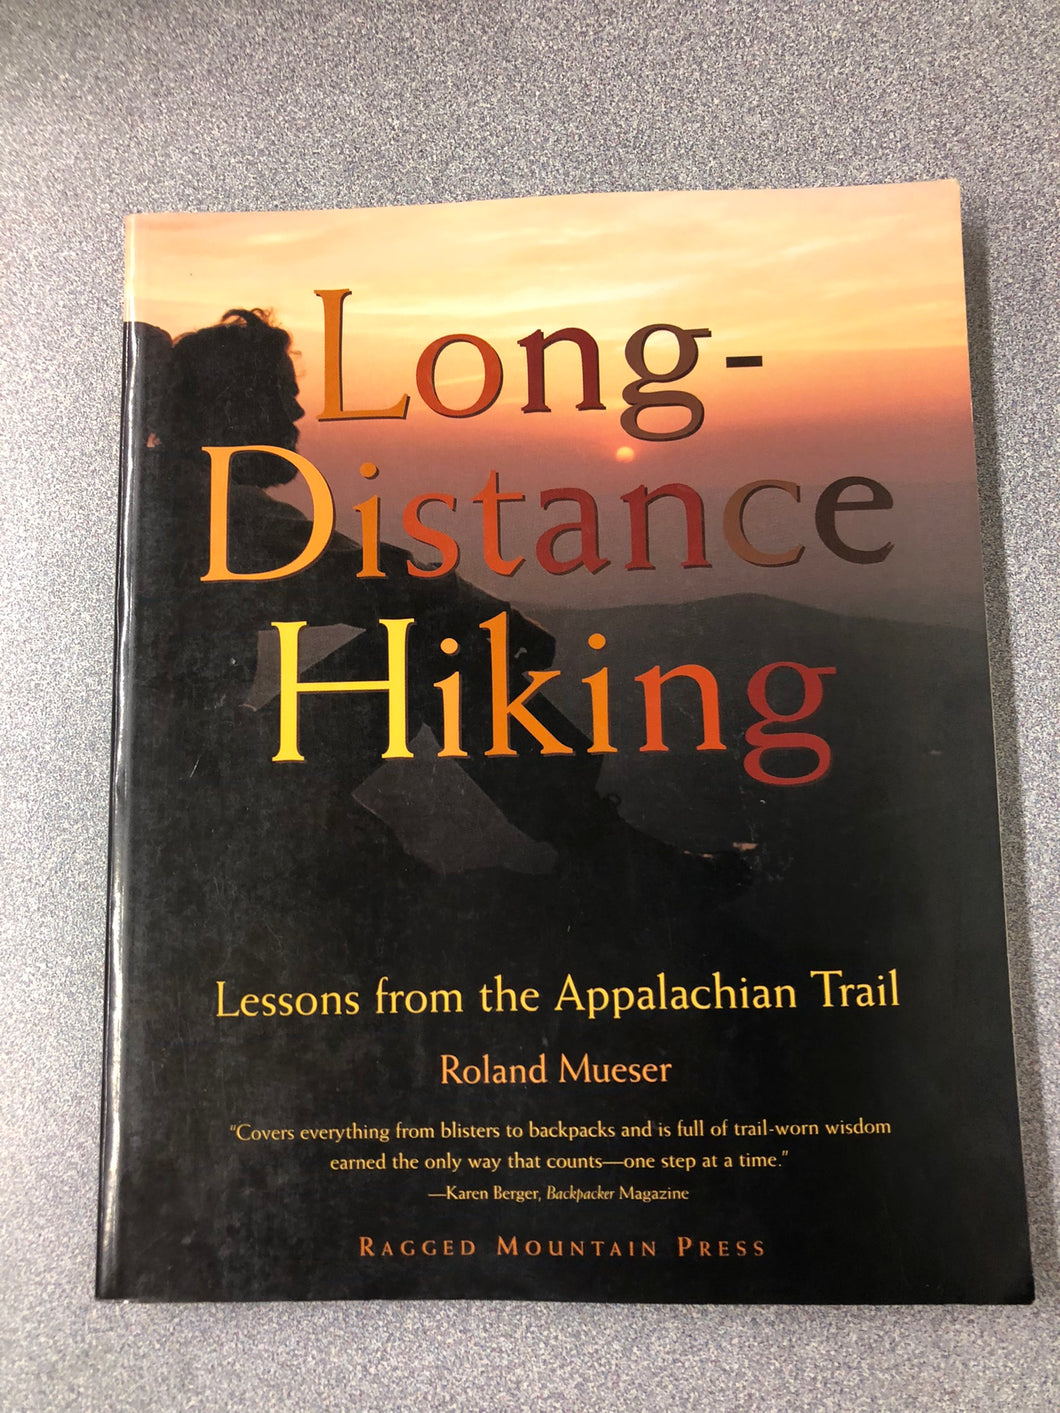 Long-Distance Hiking: Lessons from the Appalachian Trail, Mueser, Roland [1998] OU 7/22